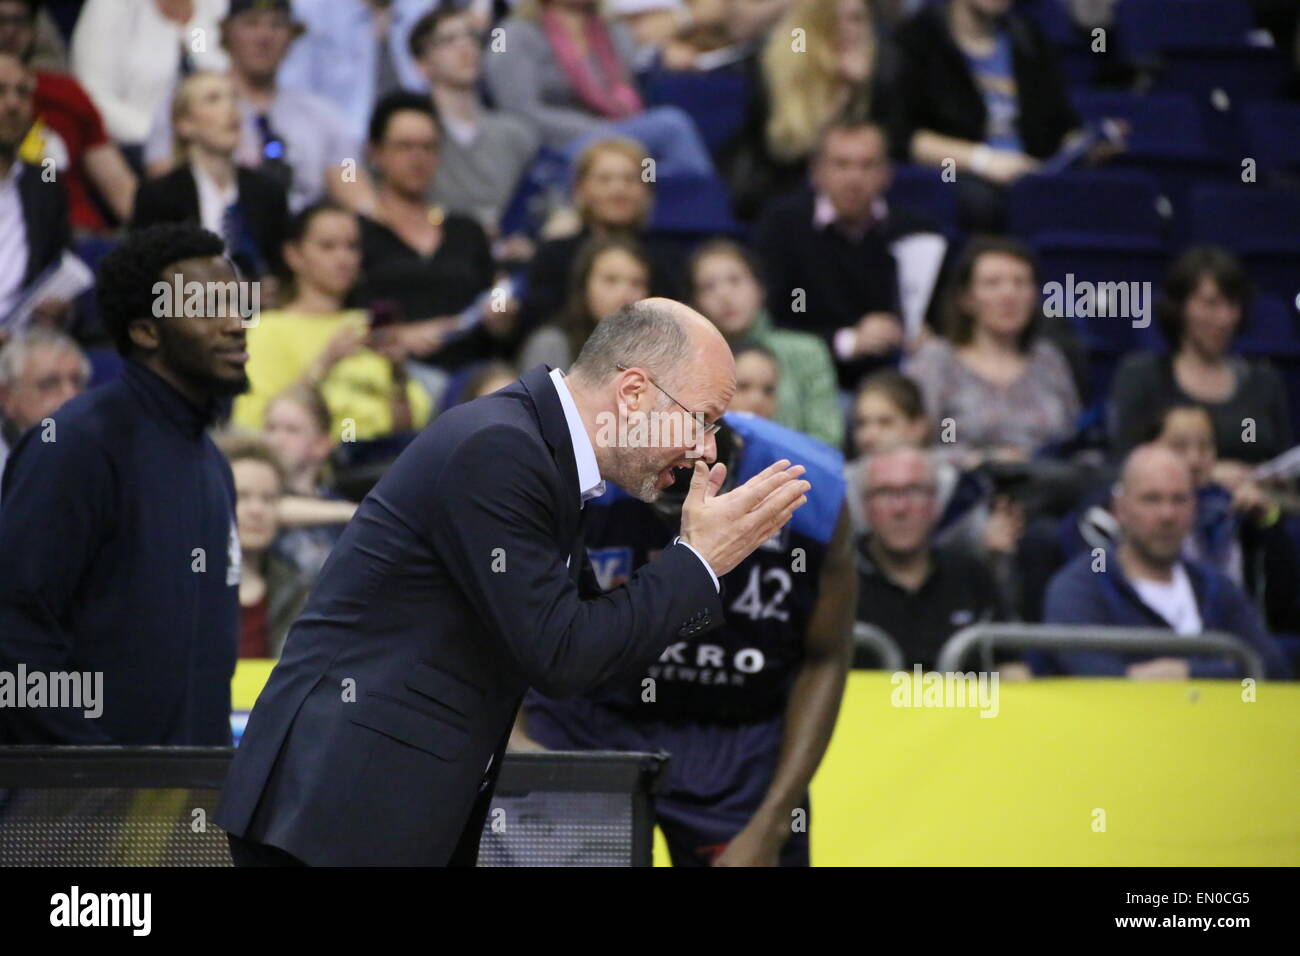 Berlin, Germany. 24th Apr, 2015. Ingo Enskat, head coach of Crailsheim Merlins instructs his players during BBL game Alba Berlin versus Crailsheim Merlins at O2 World. Credit:  Madeleine Lenz/Pacific Press/Alamy Live News Stock Photo